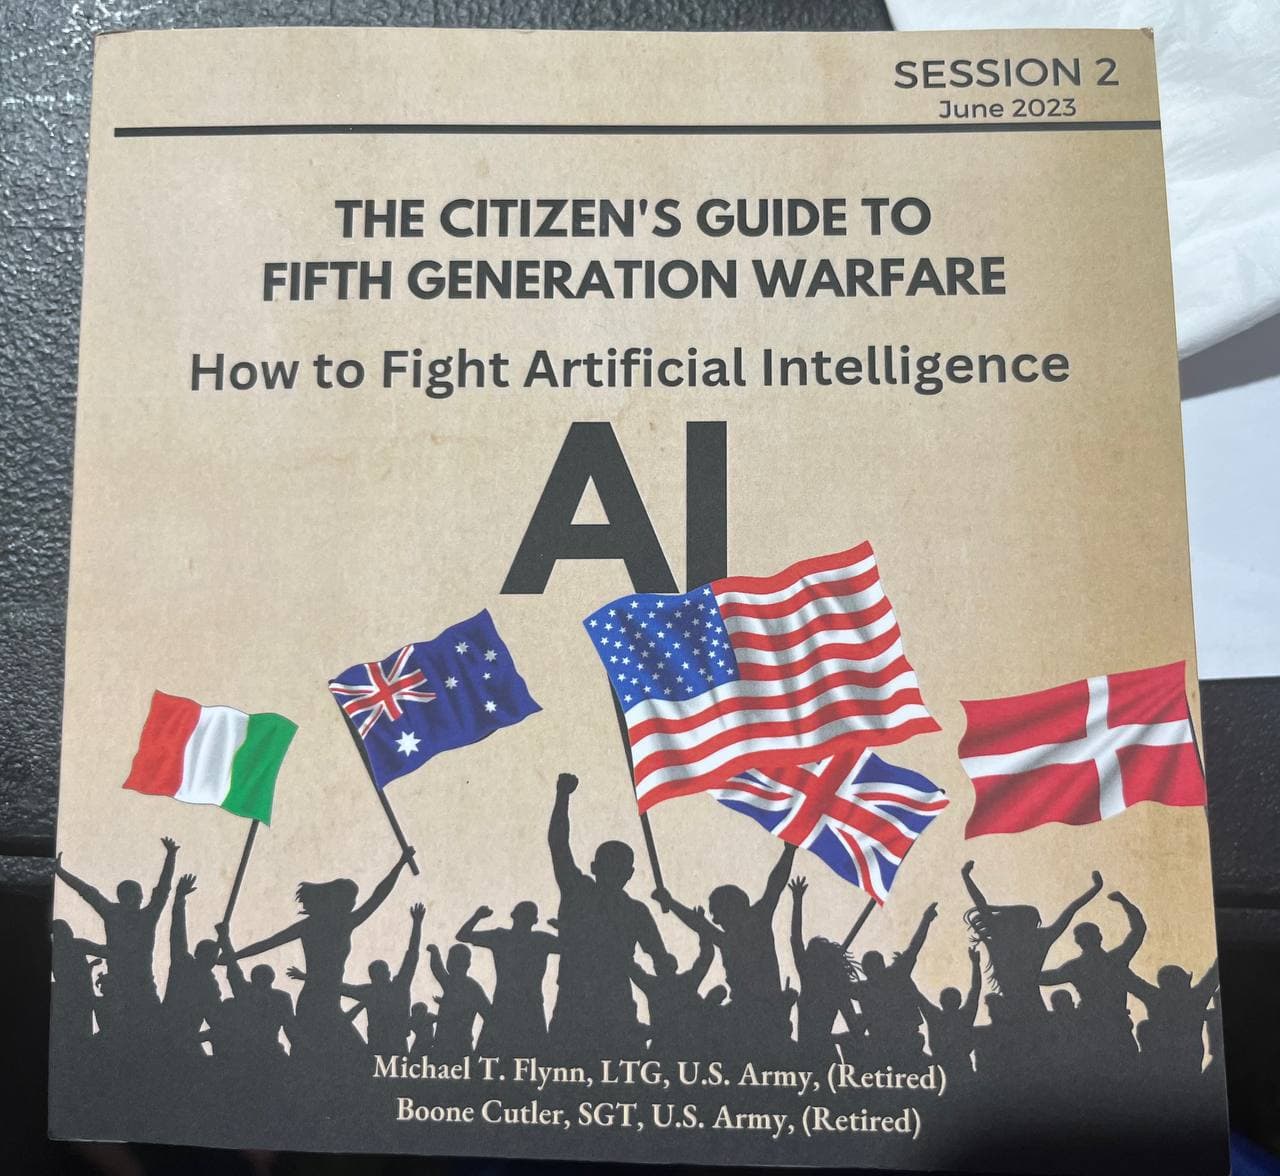 http://blog.lege.net/content/Session_Two__The_Citizens_Guide_to_Fifth_Generation_Warfare__How_to_Fight_Artificial_Intelligence_signed_by_General_Flynn/Session_Two__The_Citizens_Guide_to_Fifth_Generation_Warfare__How_to_Fight_Artificial_Intelligence_signed_by_General_Flynn__1280x1176.jpg